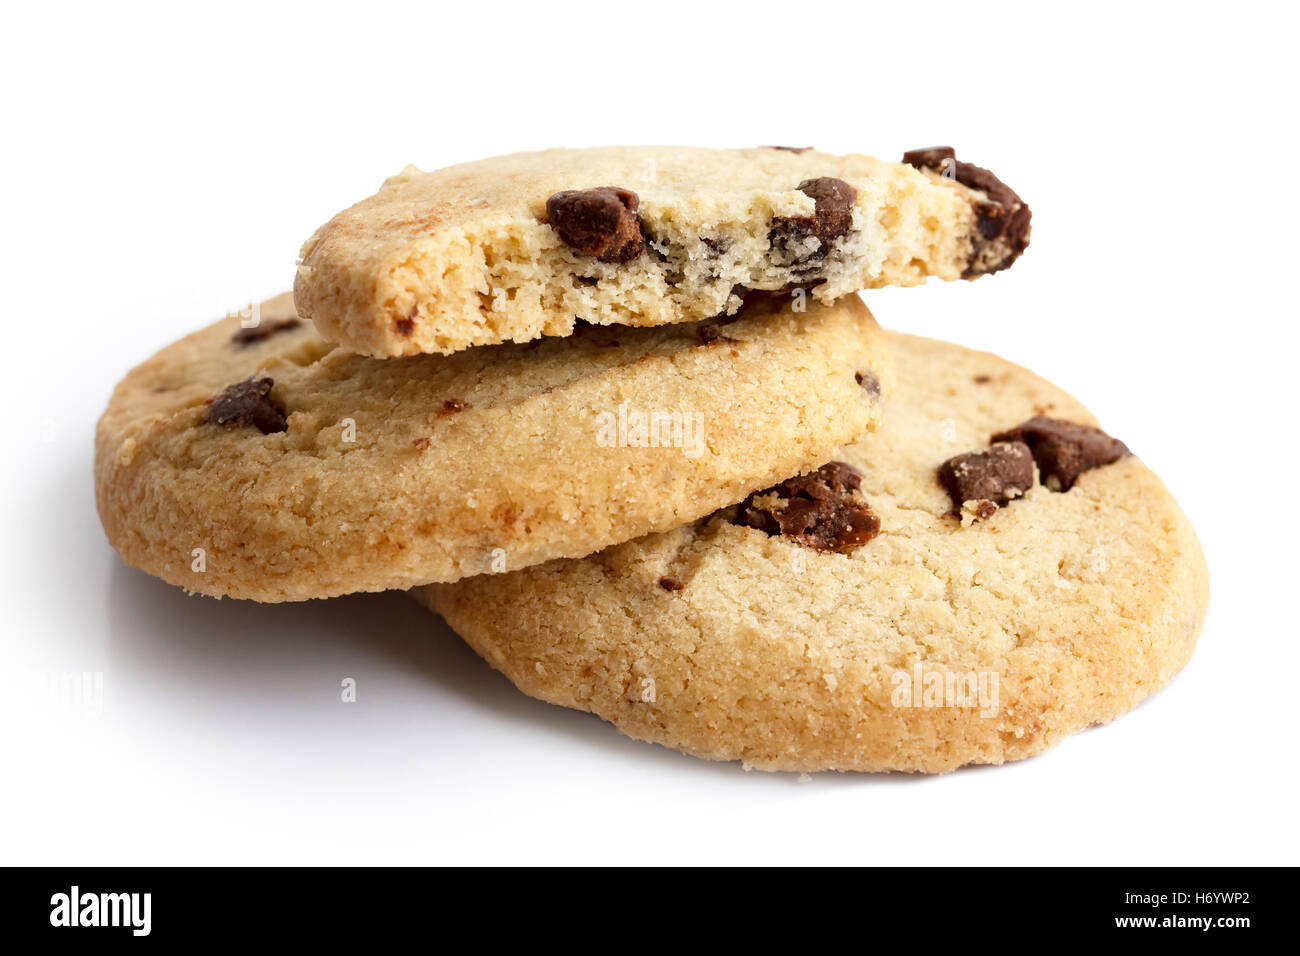 Isolated round chocolate chip shortbread biscuits. Broken piece. Stock Photo